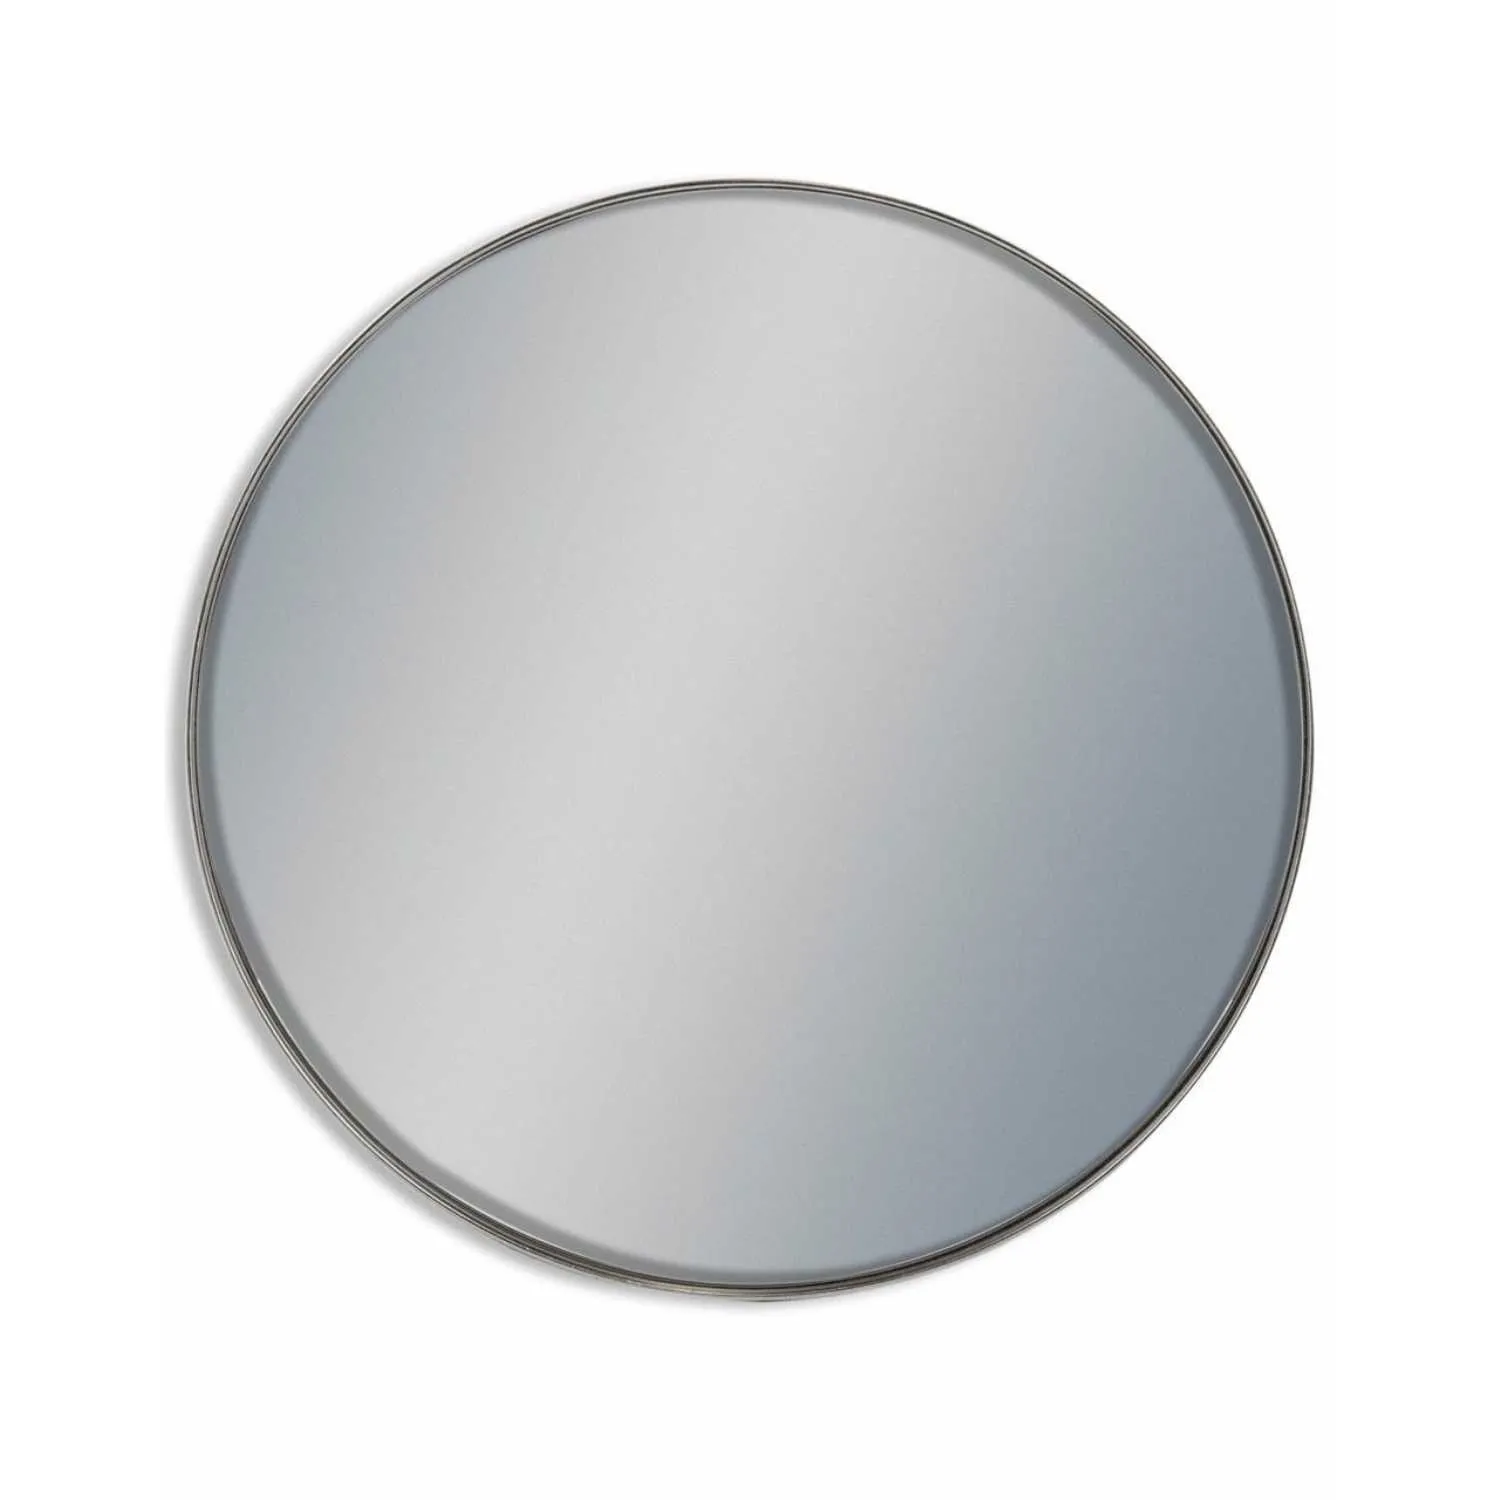 Large Round Silver Framed Wall Mirror 120cm Diameter